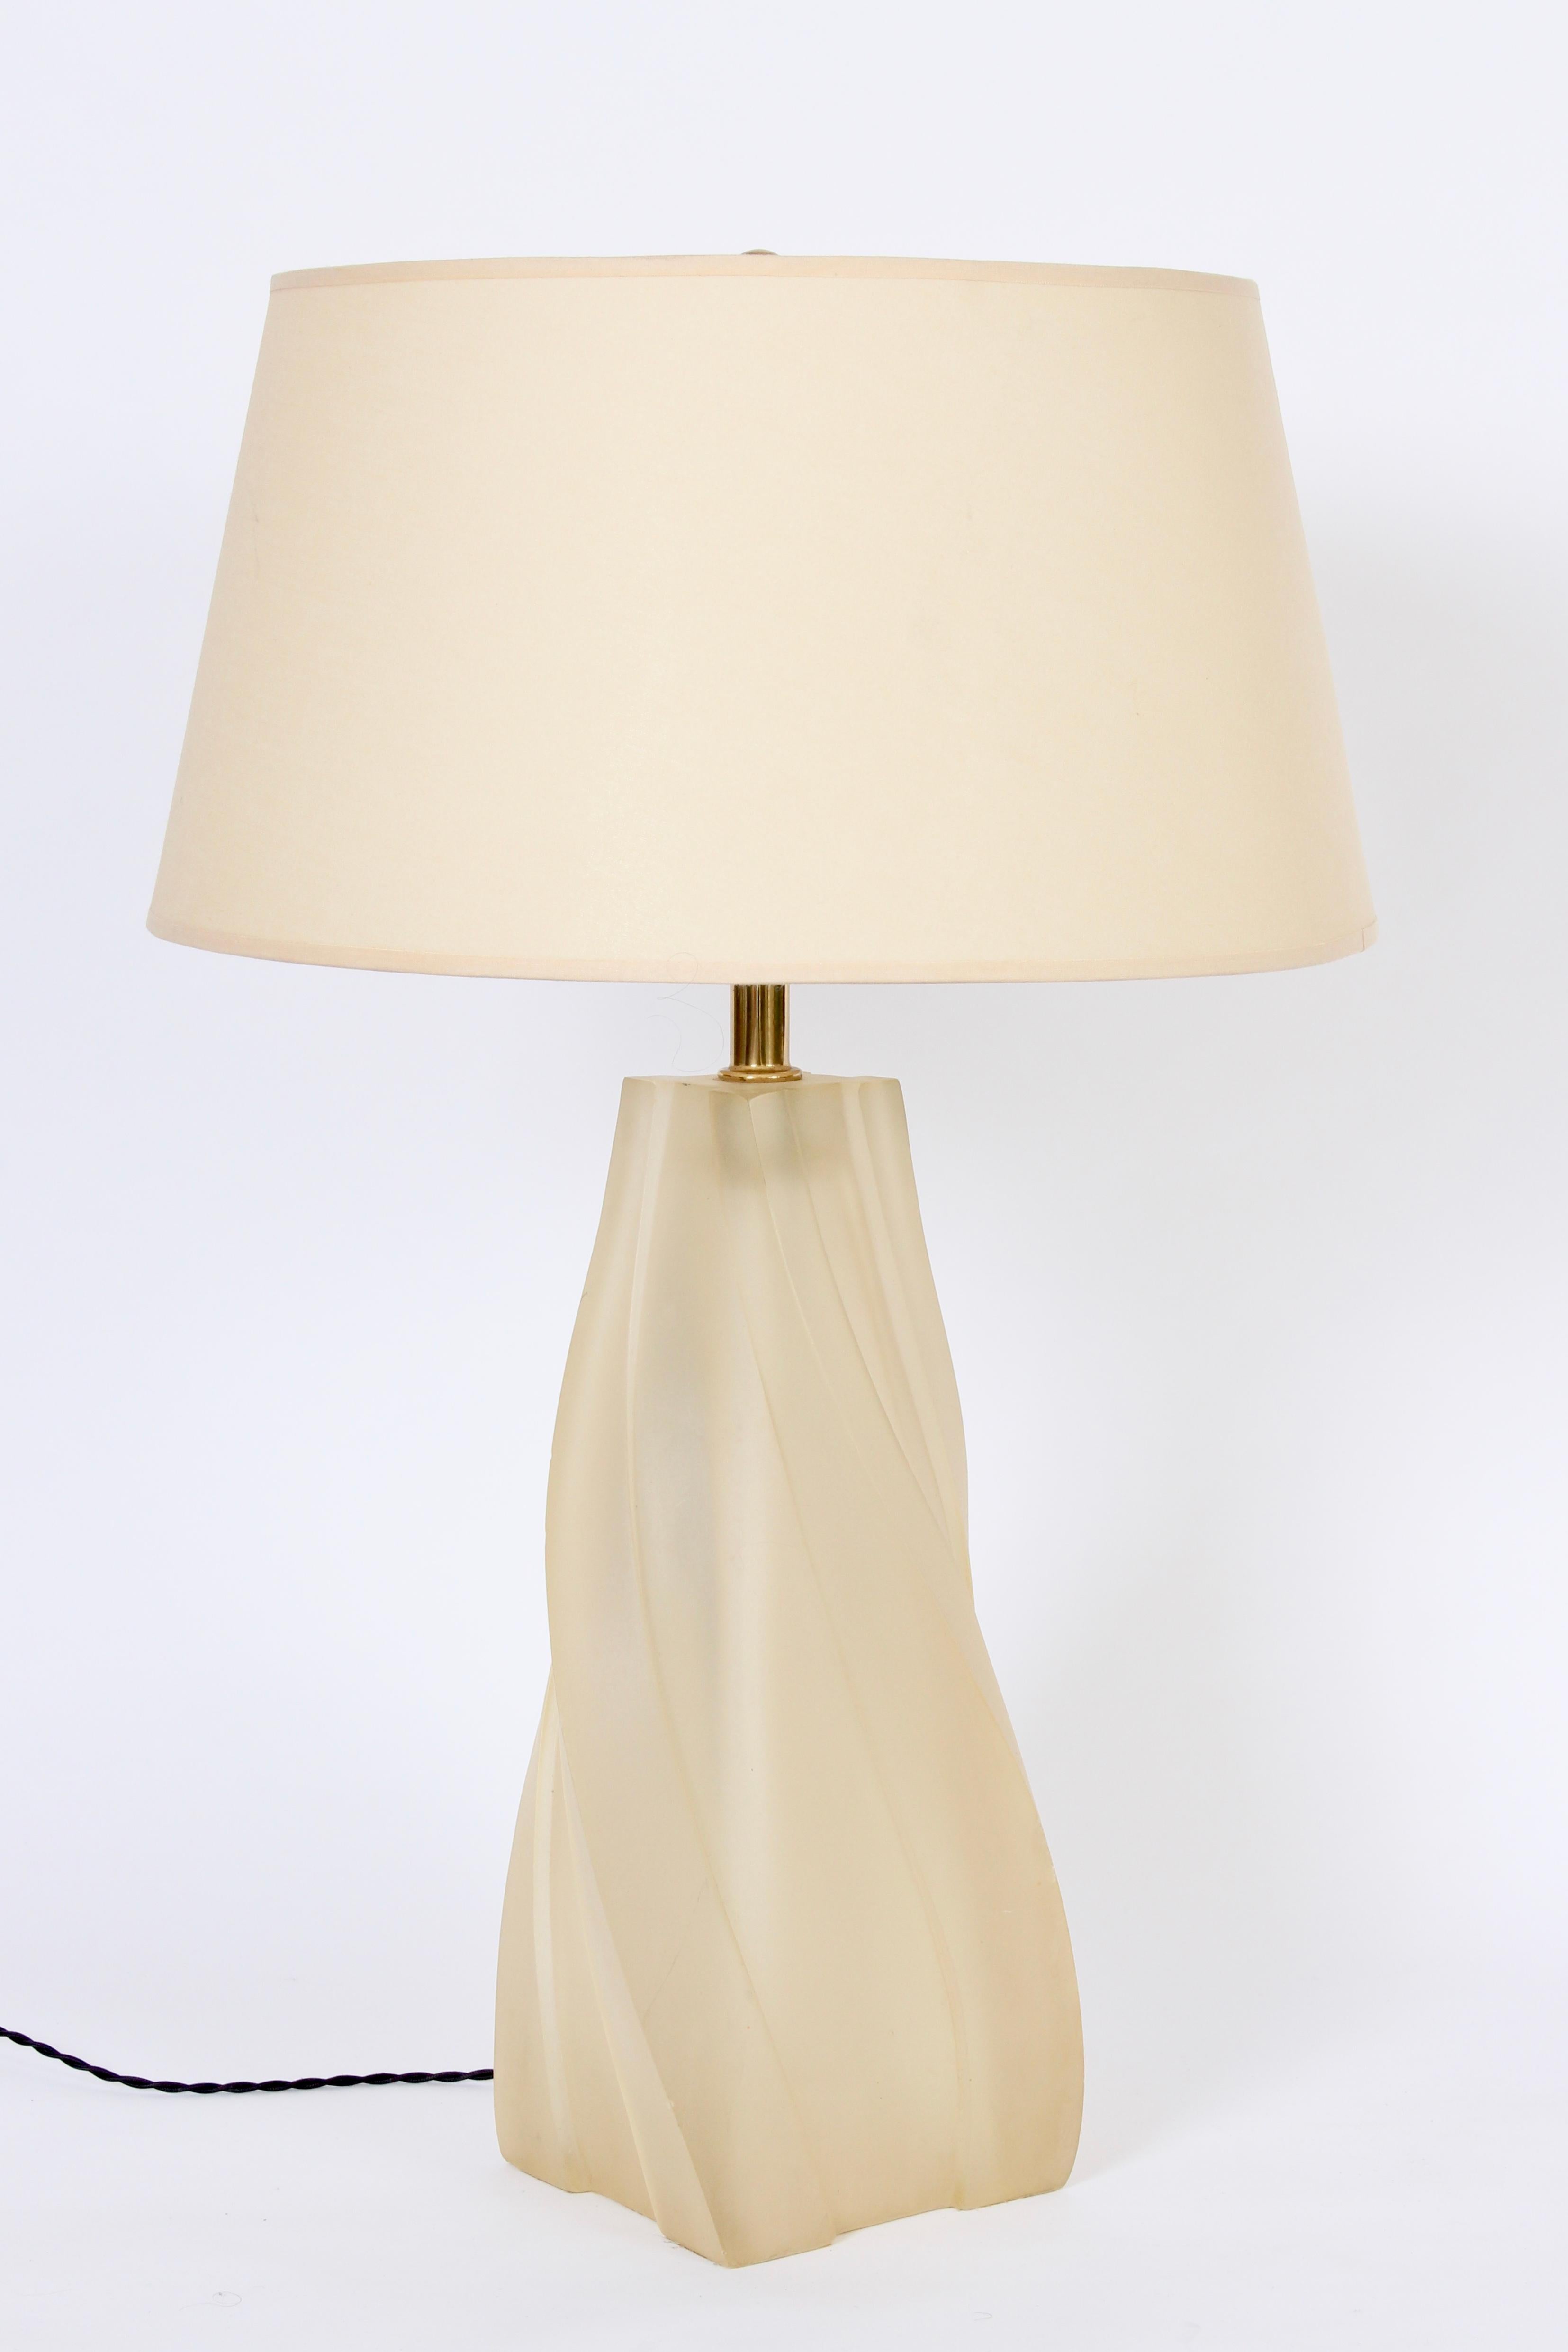 Paolo Gucci Organic Modern Translucent Cream Cast Resin Table Lamp, 1970's For Sale 4